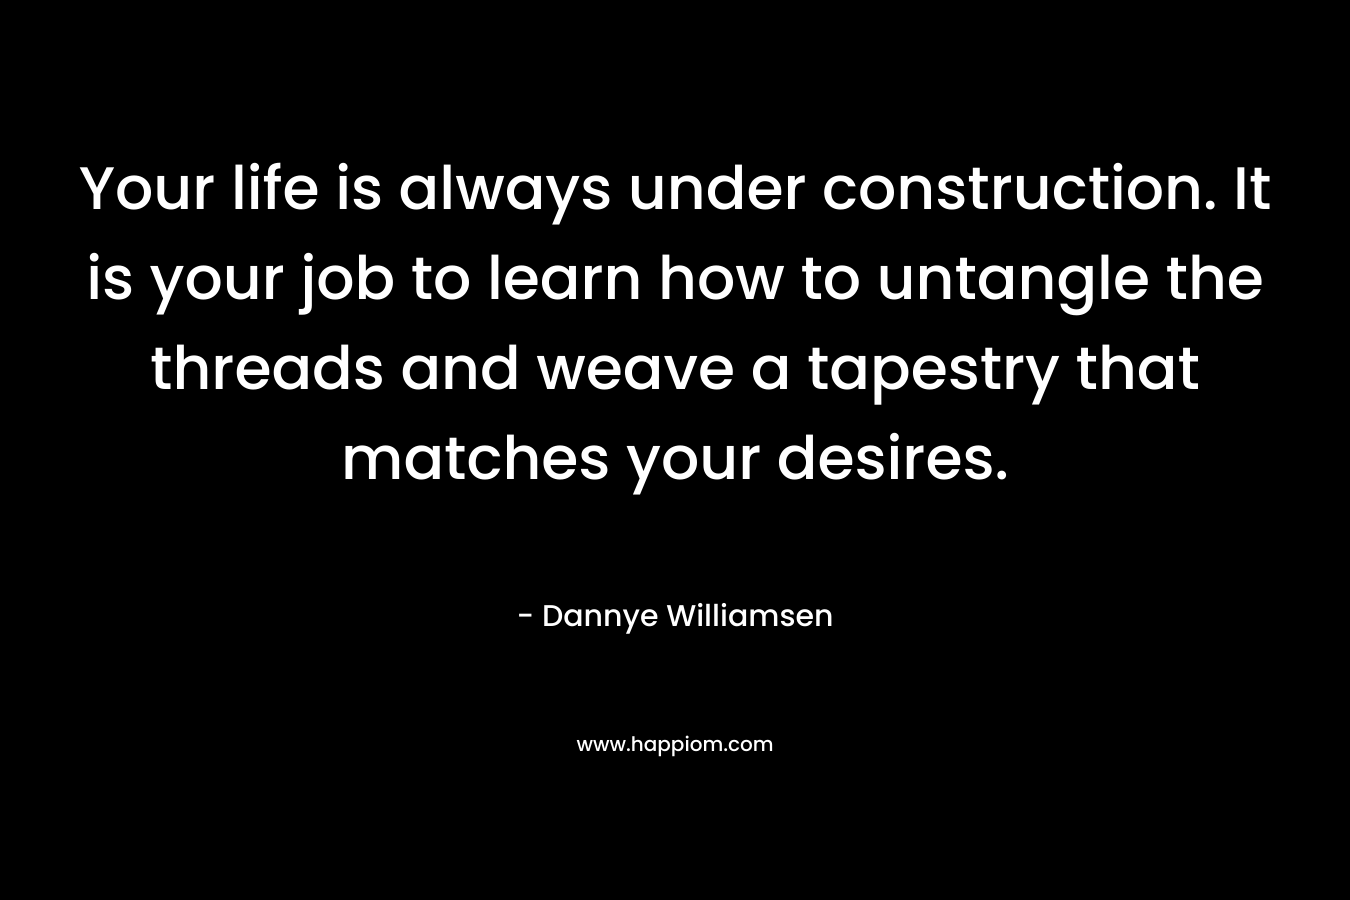 Your life is always under construction. It is your job to learn how to untangle the threads and weave a tapestry that matches your desires.